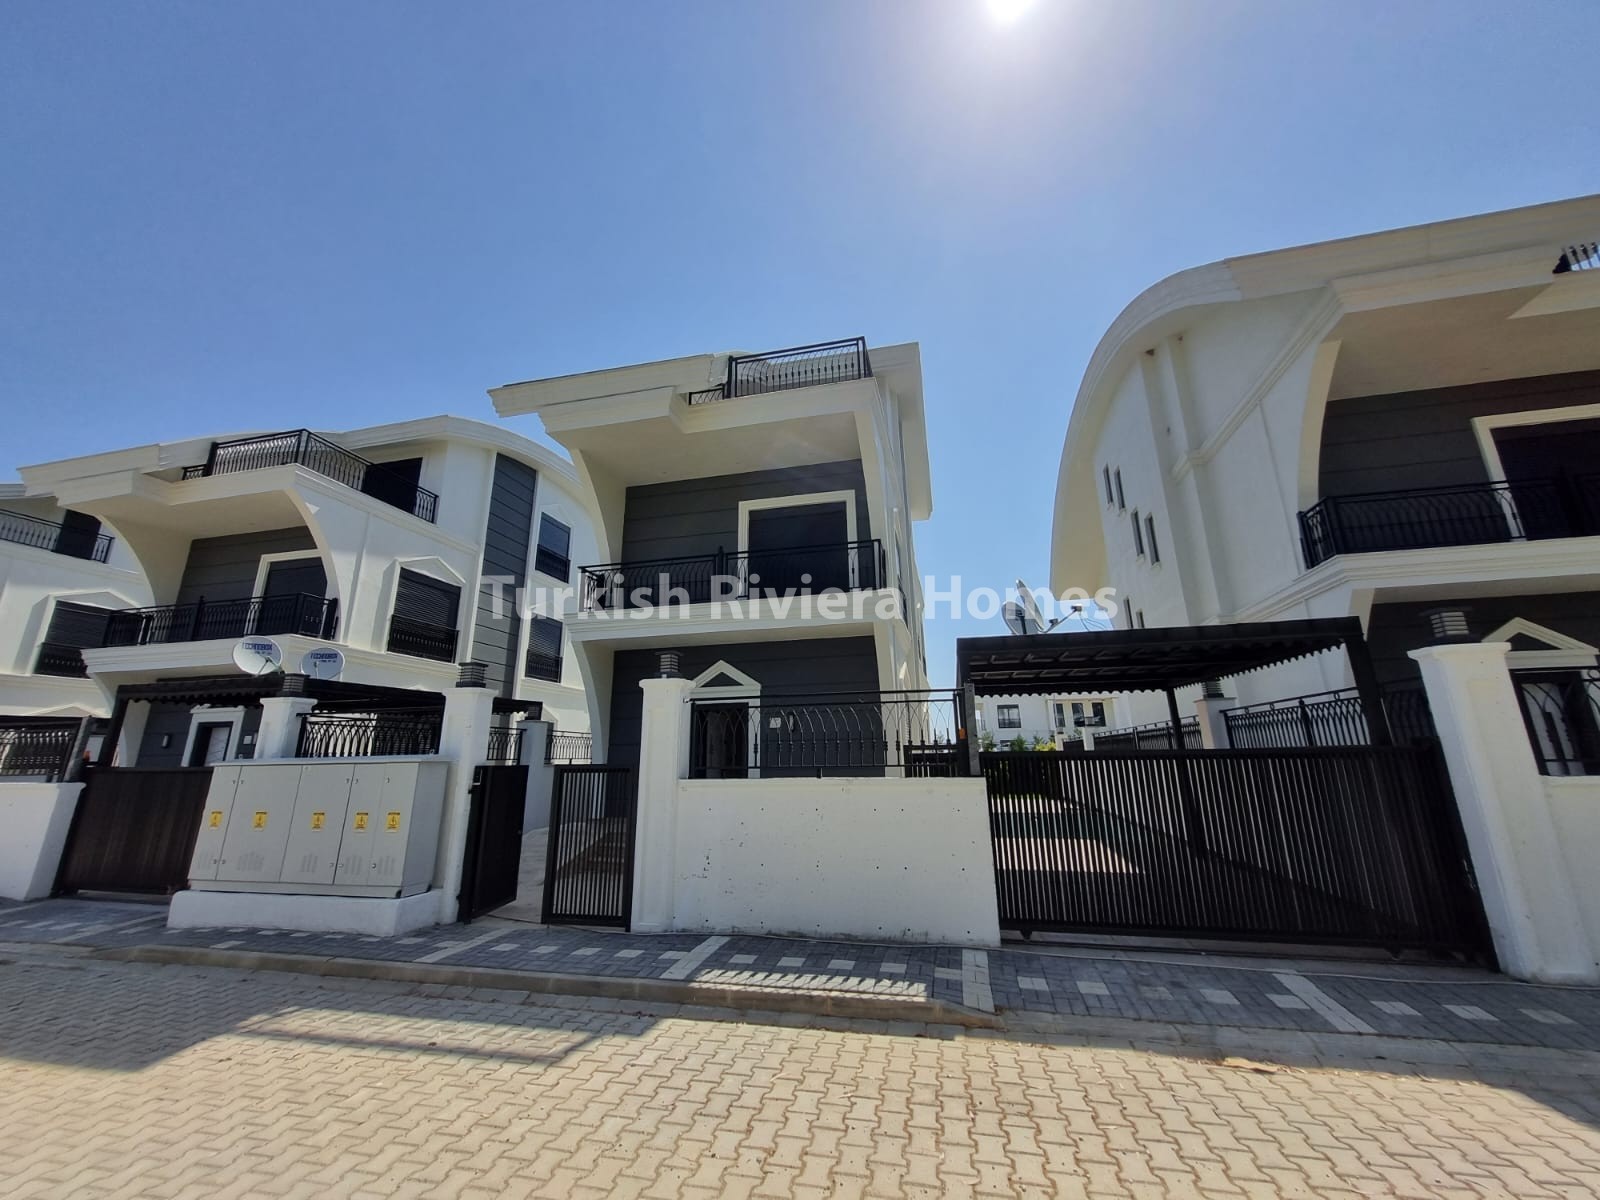 Detached Villas Equipped with Automation System Close to Belek